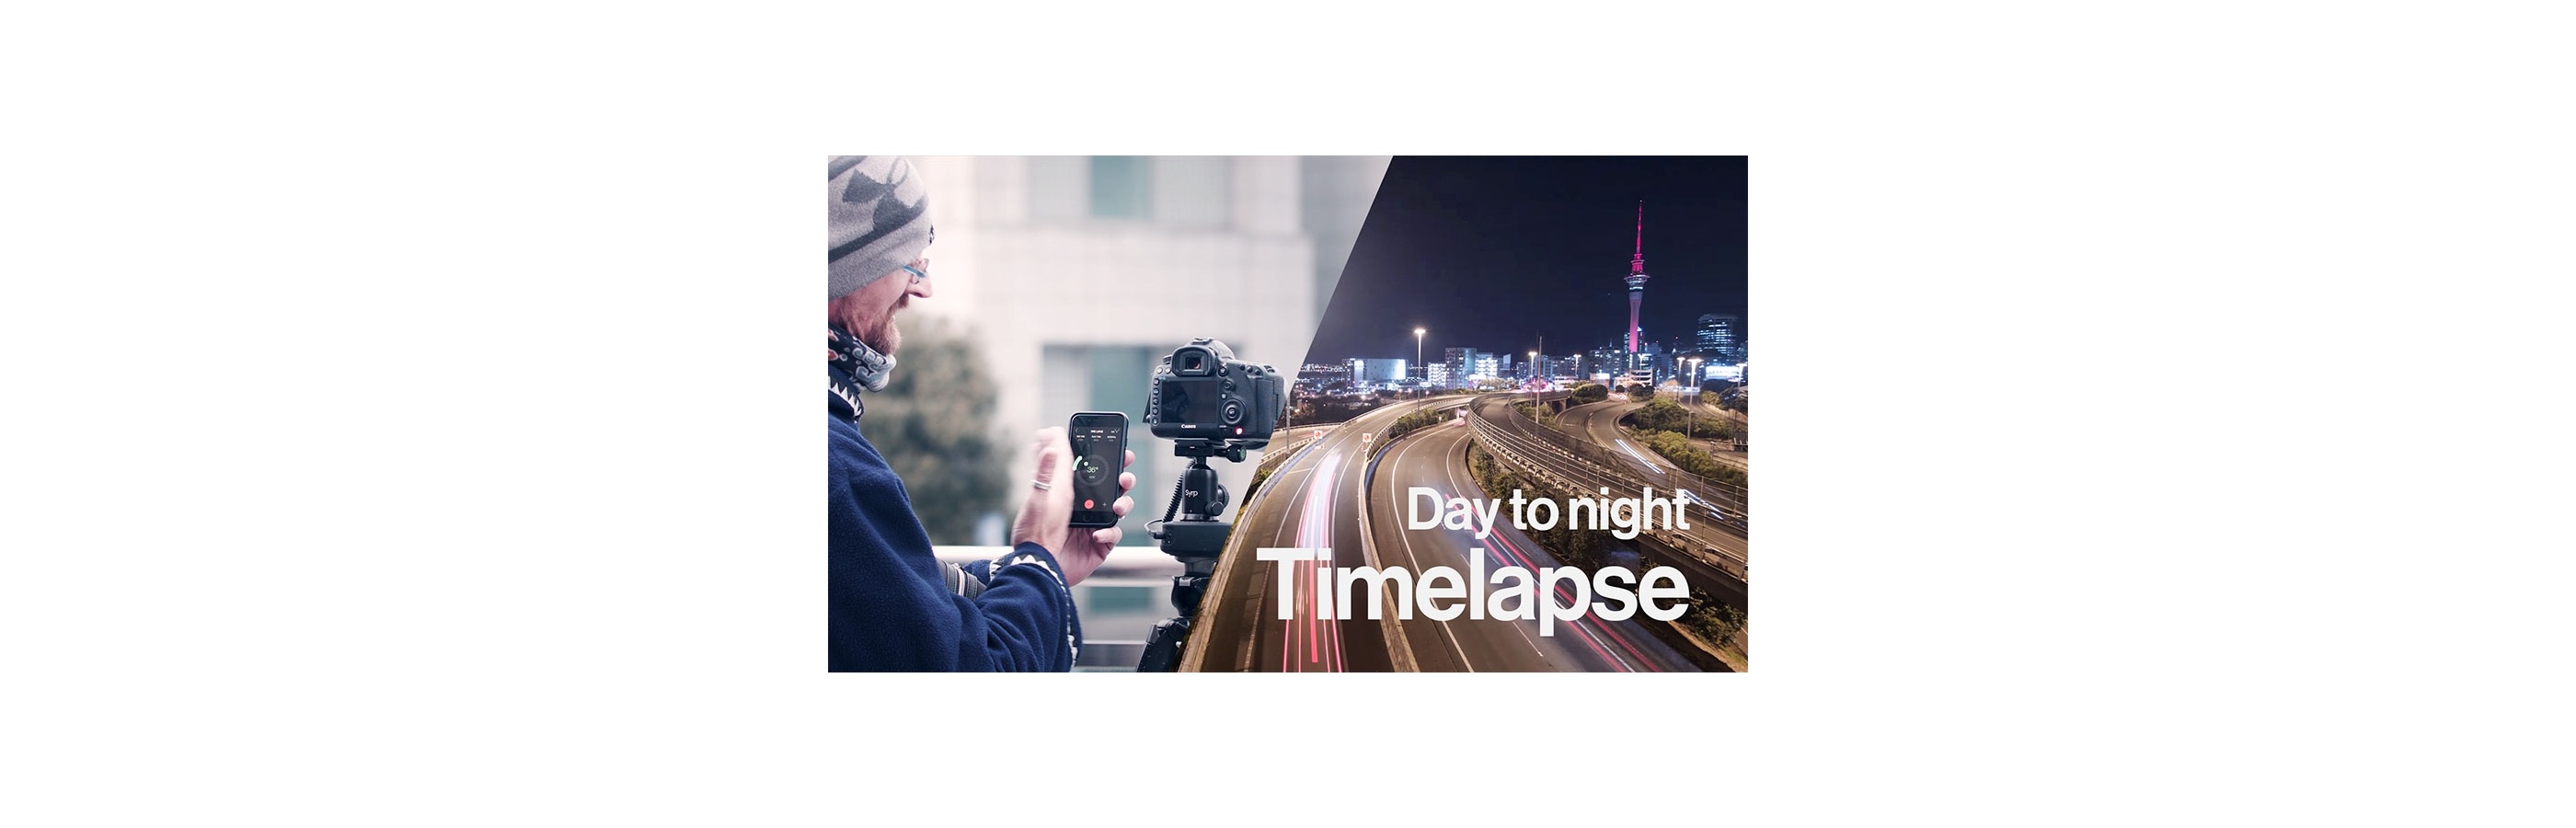 How to Setup a Motion Day-to-Night Traffic Timelapse - Mark Thorpe